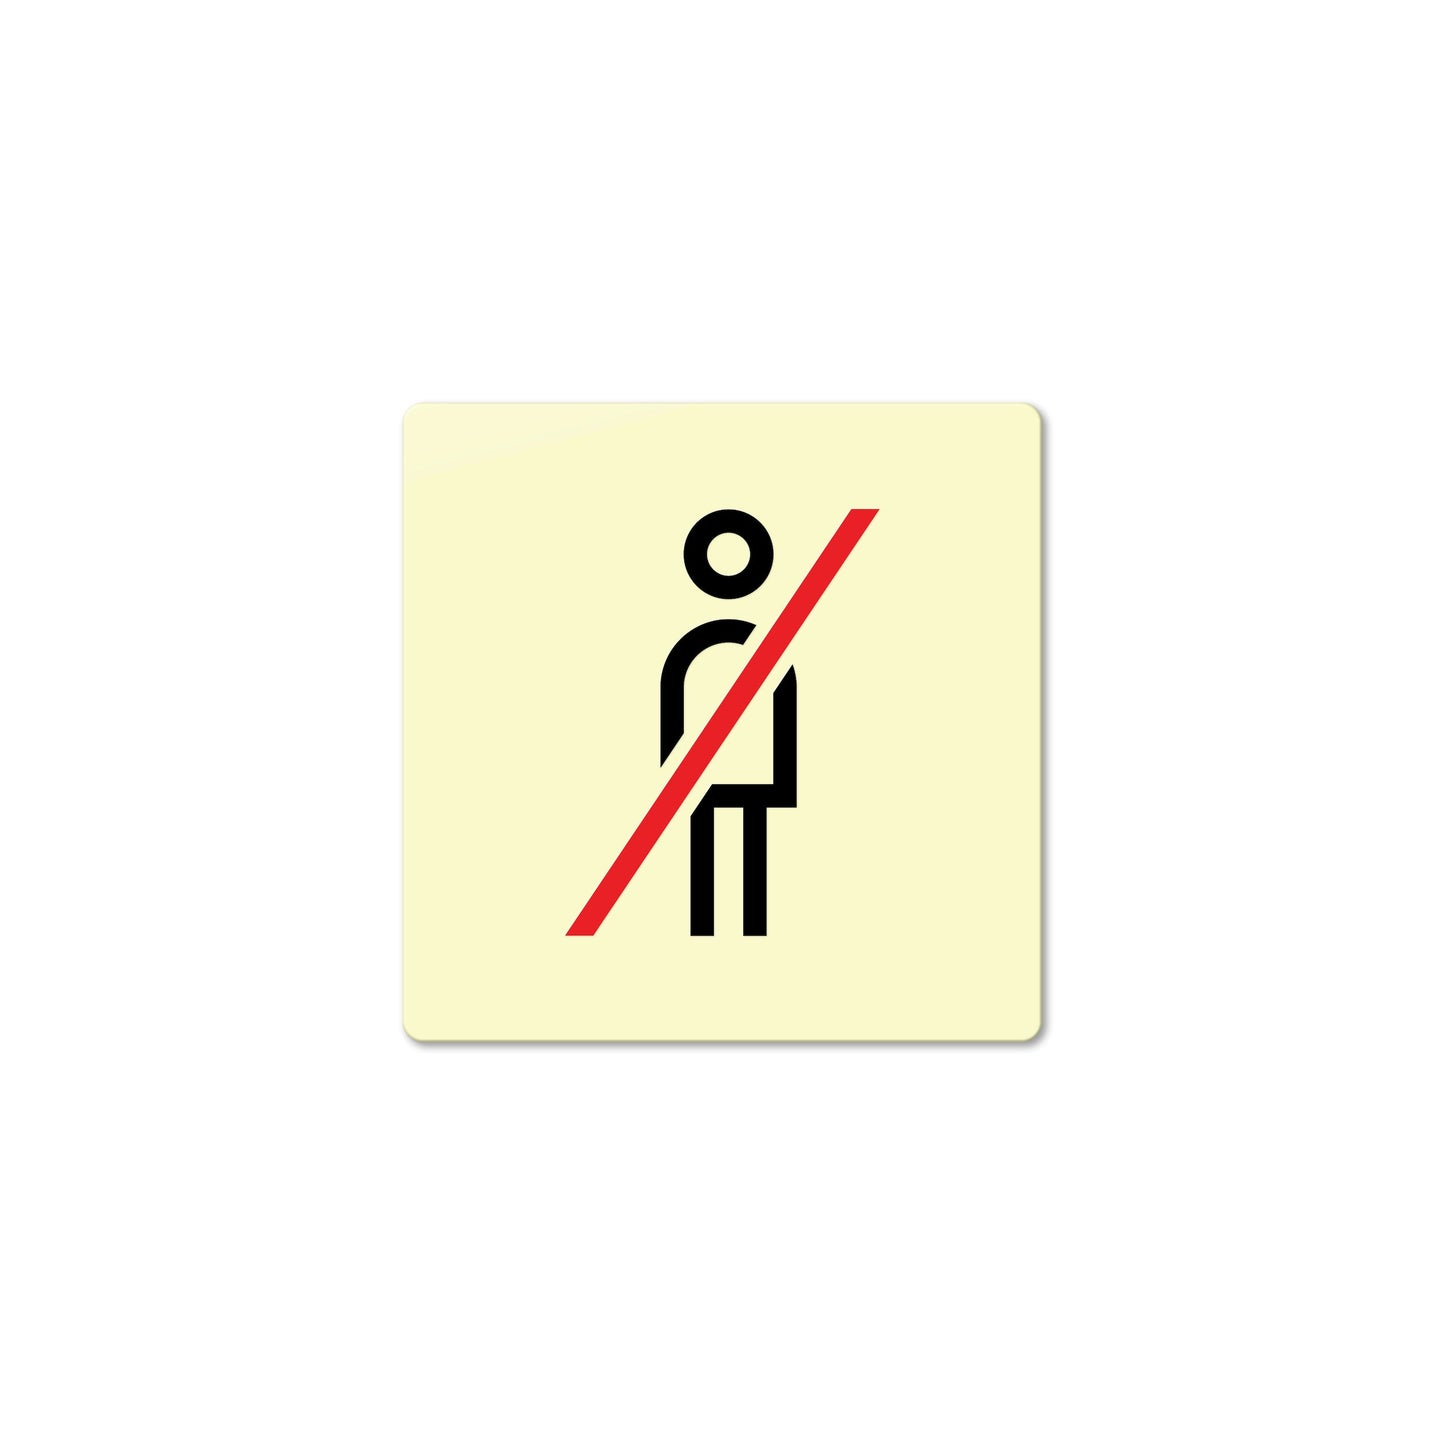 Authorised Personnel Only (Pictogram)